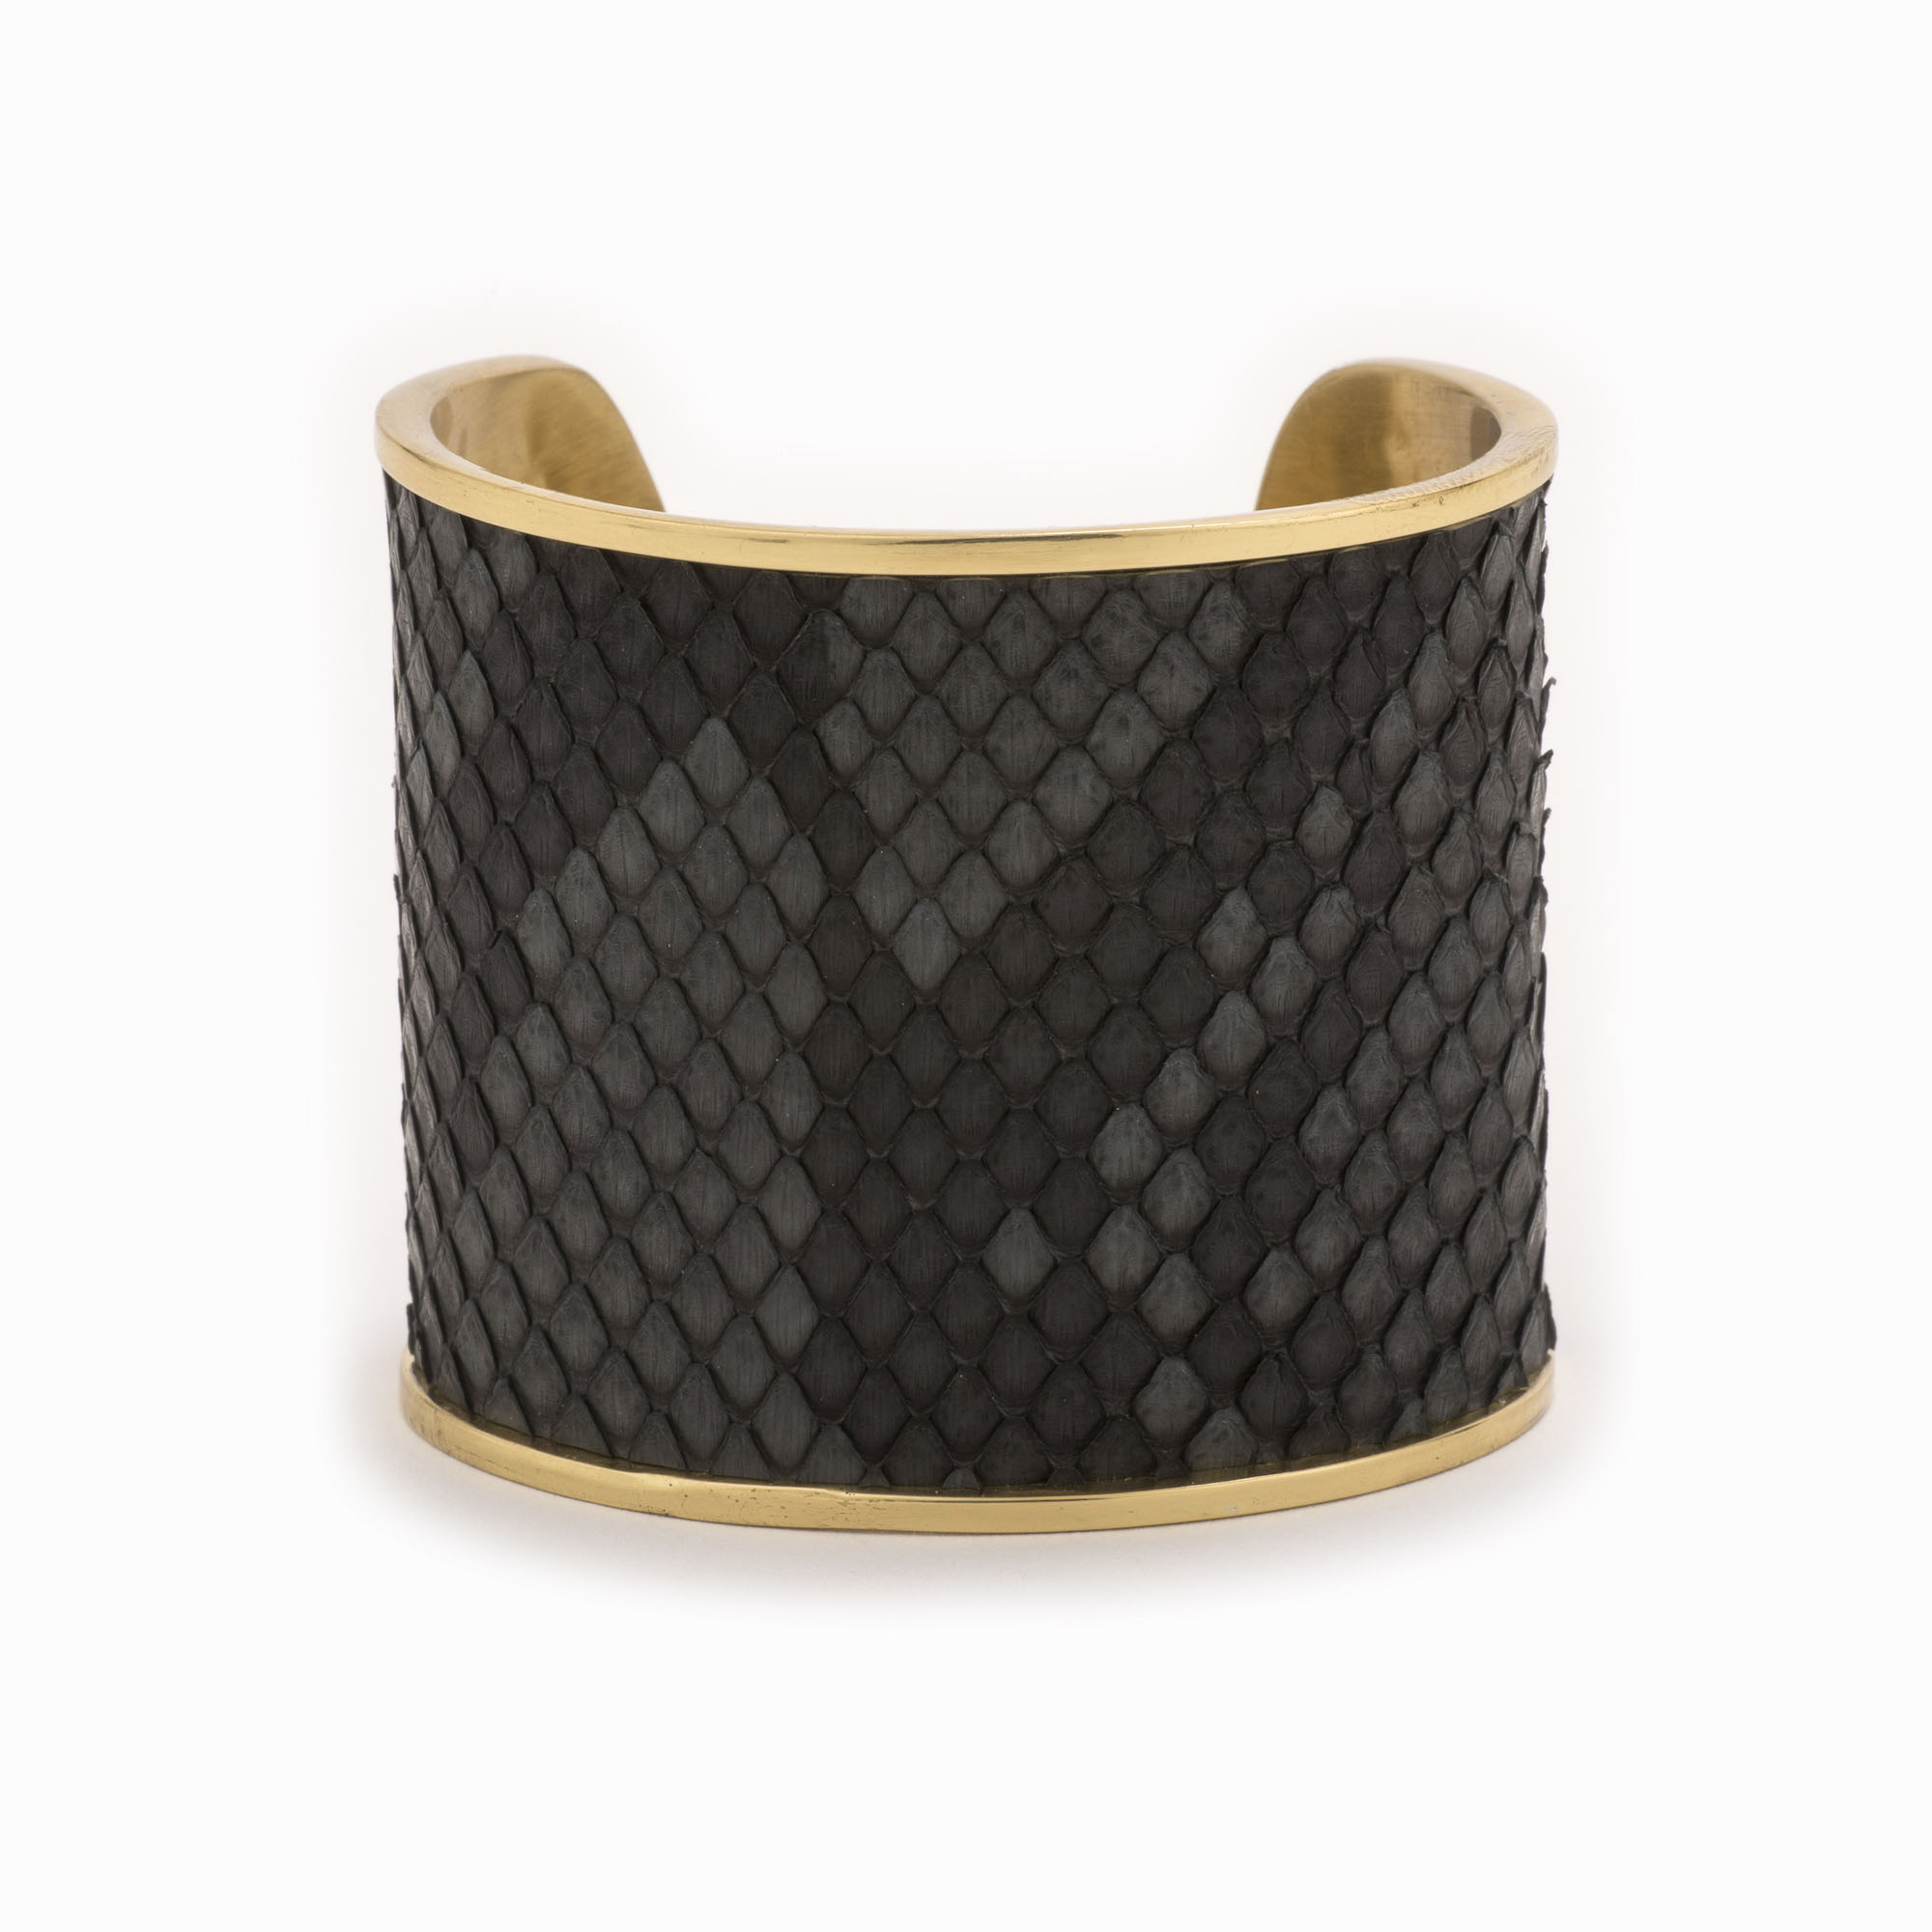 Featured image for “Large Charcoal Gold Cuff”